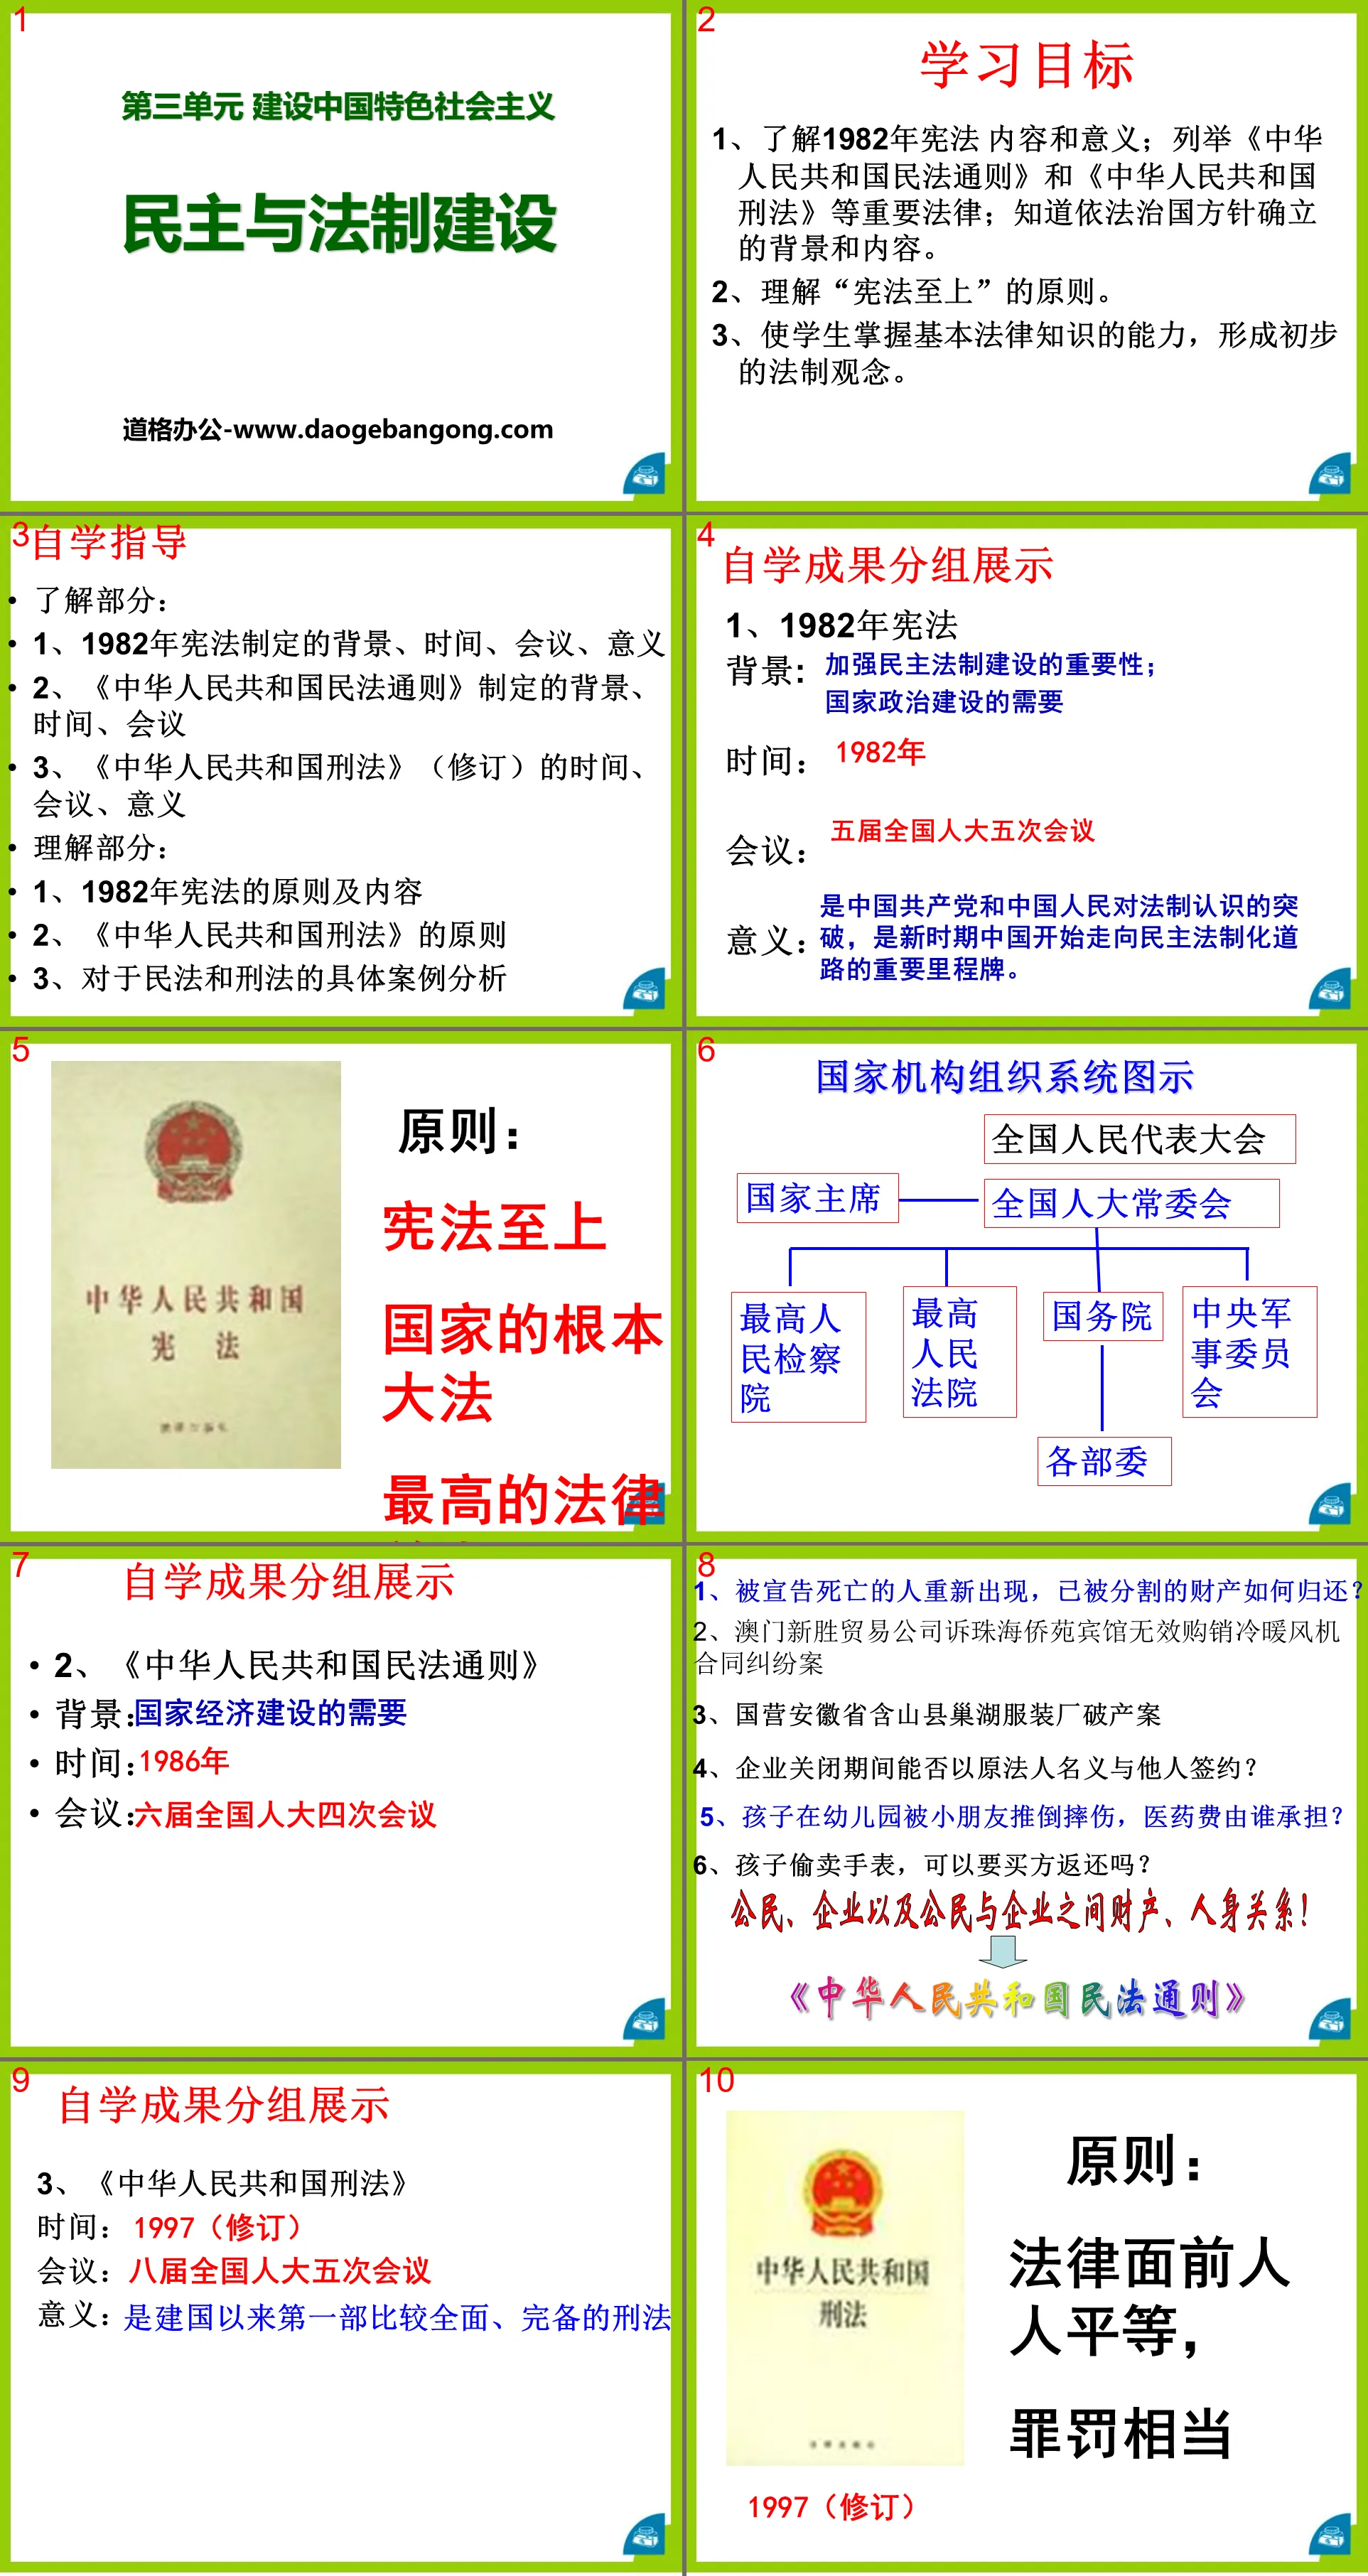 "Democracy and Legal System Construction" Building Socialism with Chinese Characteristics PPT Courseware